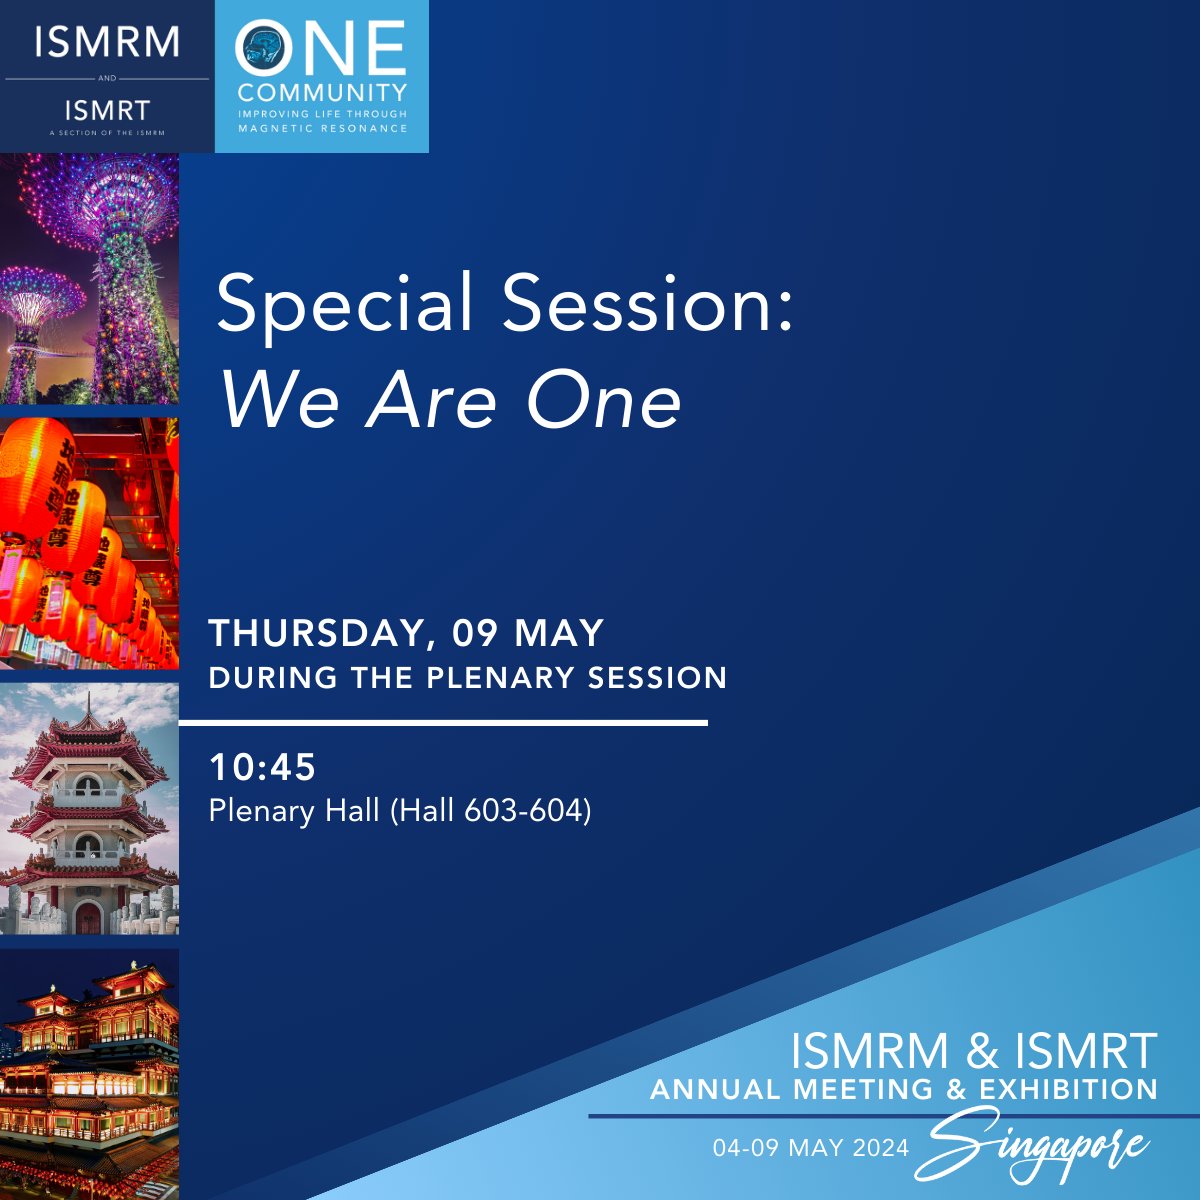 Join us for the Special Session: We Are One - Today, MR patients from Singapore will recount their own experiences and stories. See the impact of our industry and remind ourselves why we do what we do. #ISMRM2024 #ISMRT2024 #ISMRM #ISMRT #MRI #MR #MagneticResonance #Singapore